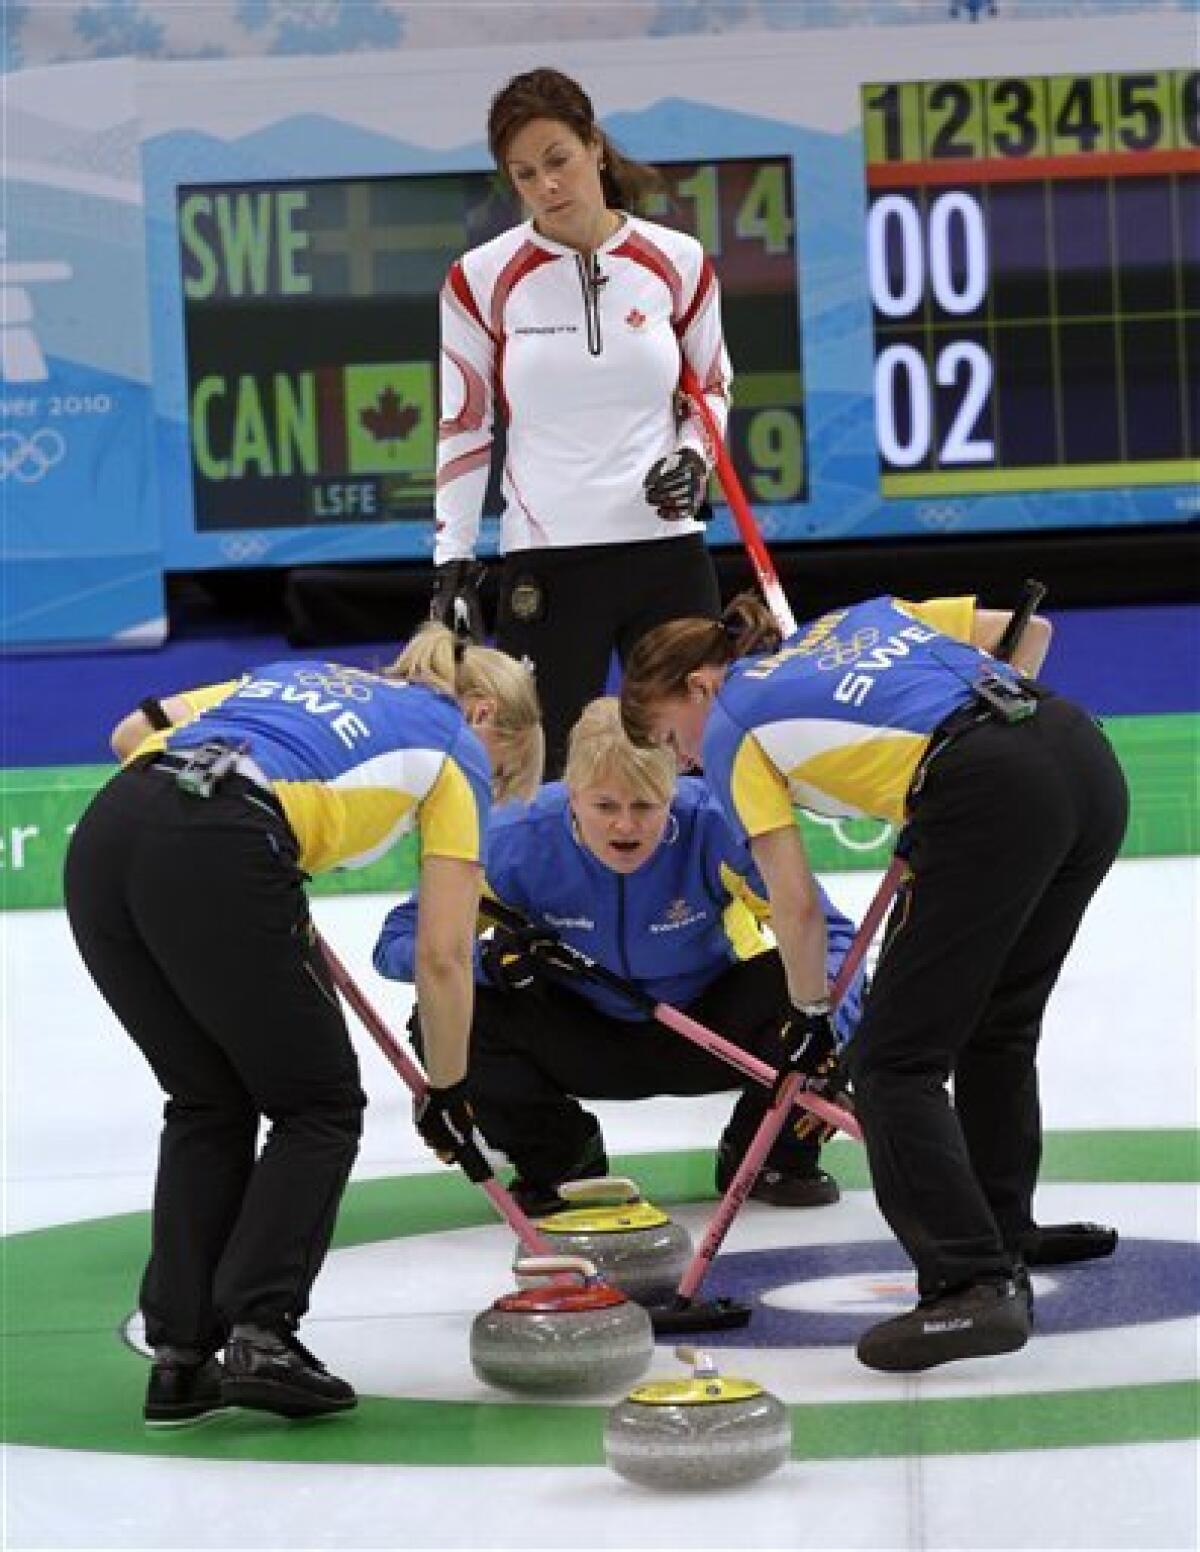 The Norwegian Olympic Curling Team's Pants